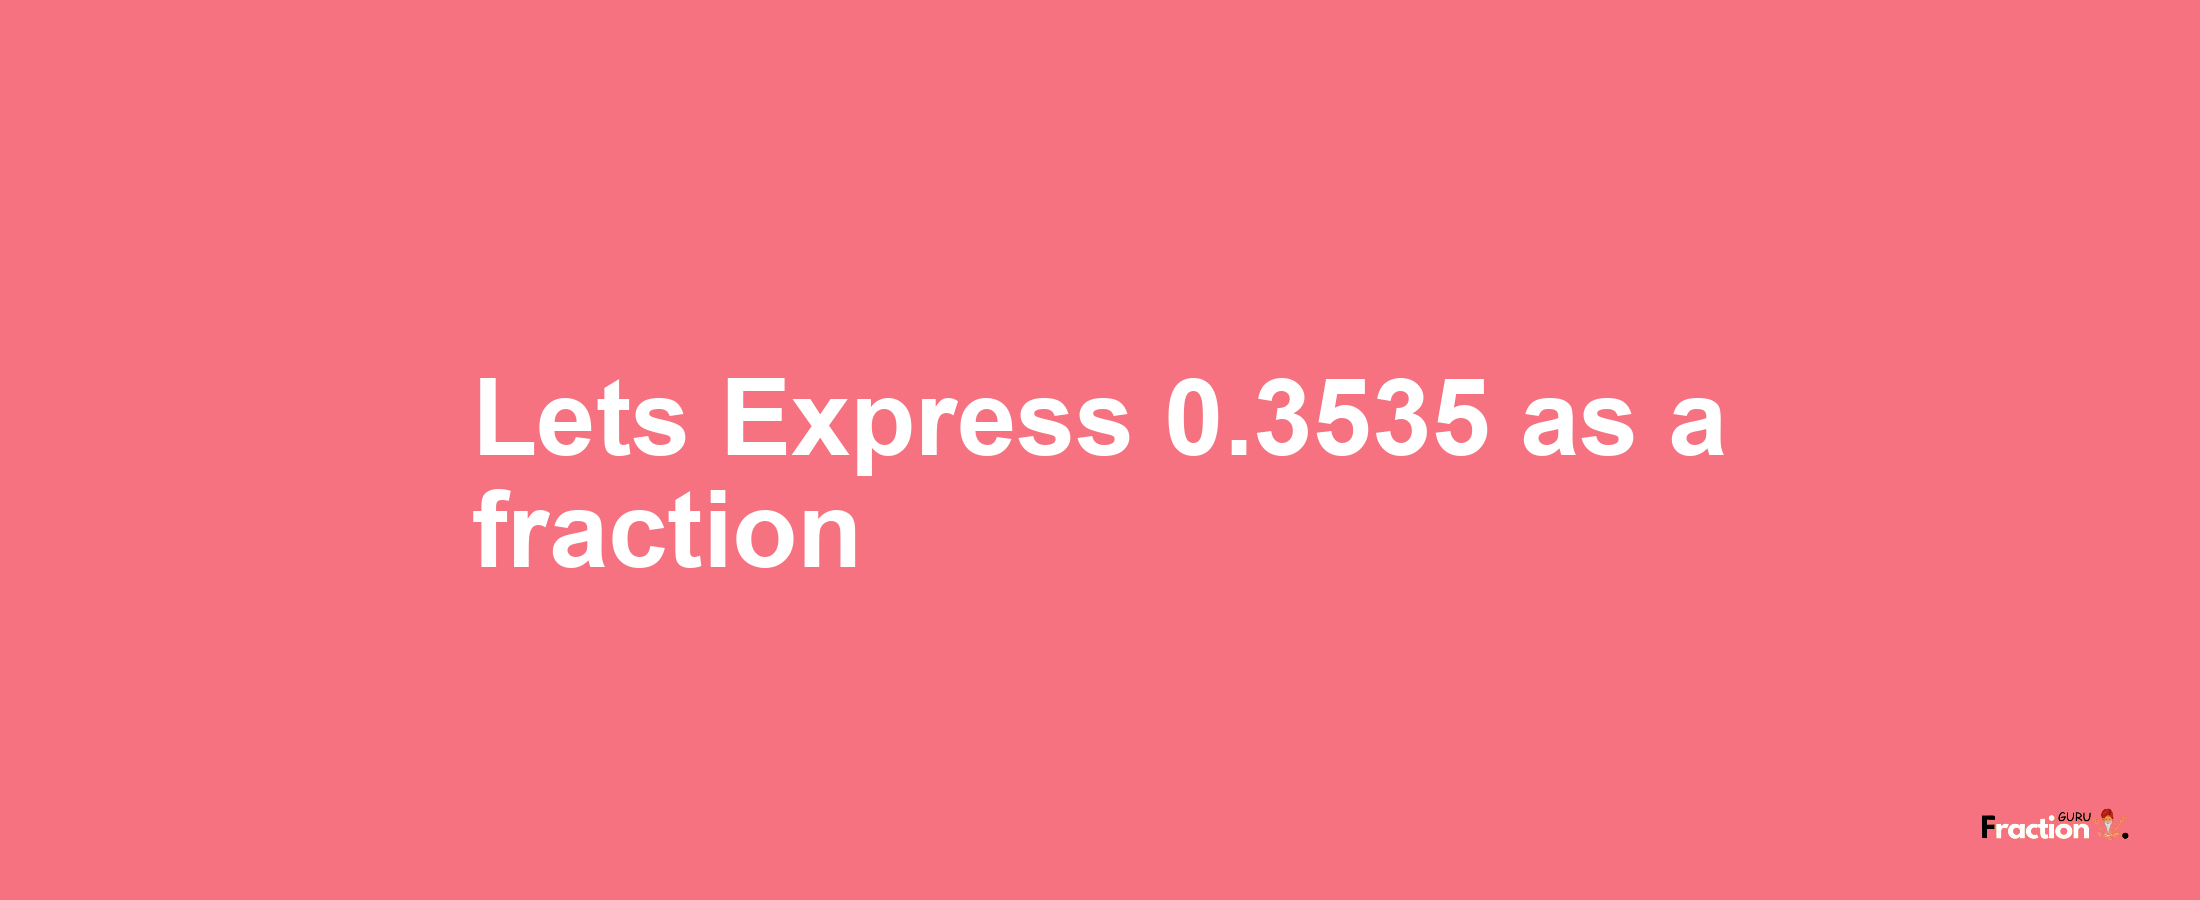 Lets Express 0.3535 as afraction